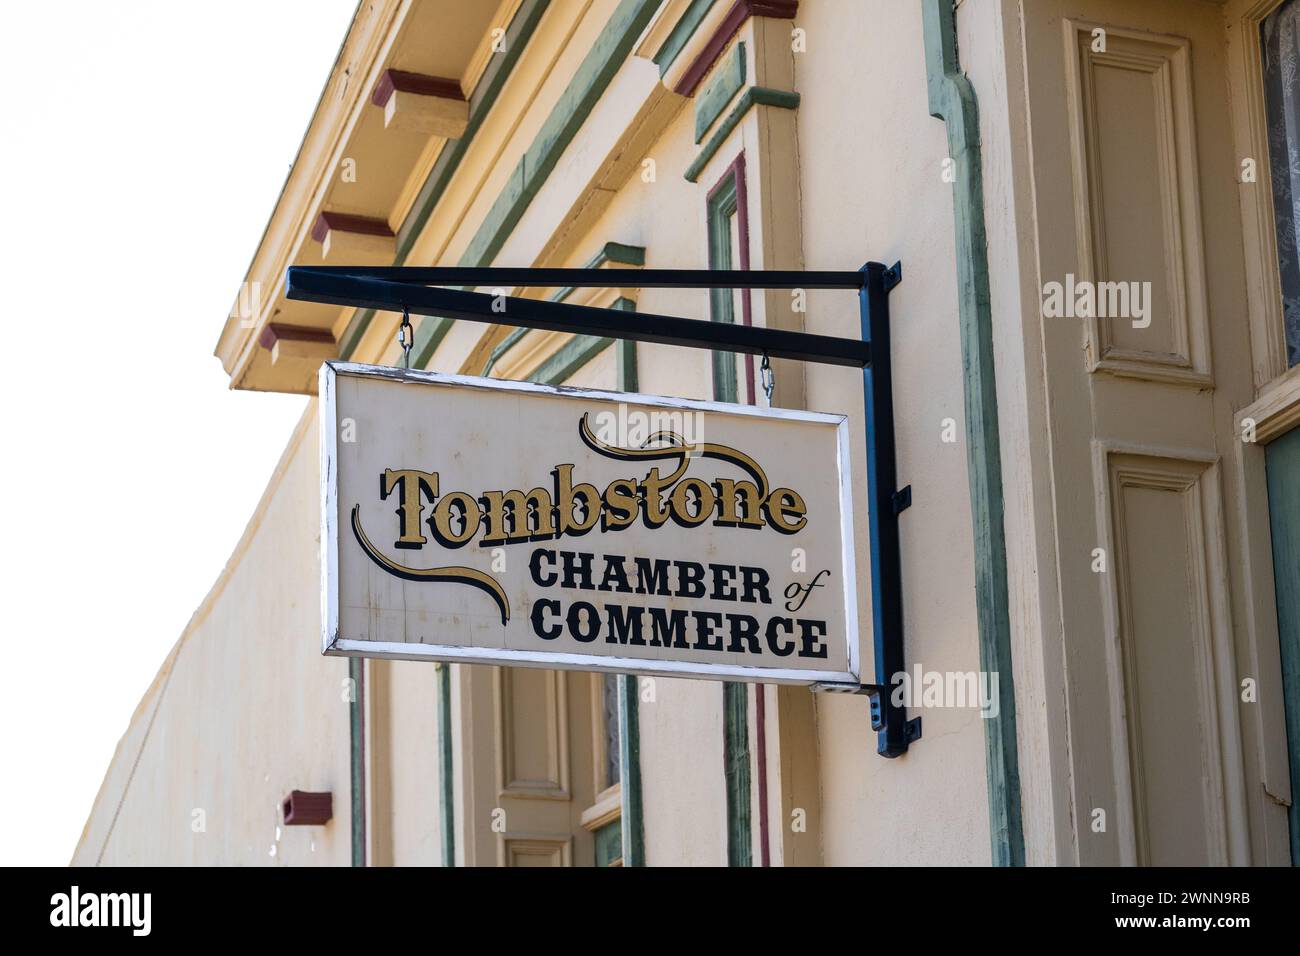 Tombstone, AZ - Oct. 9, 2021: Sign at the Tombstone Chamber of Commerce. Tombstone was a silver mining town best known for the shootout at the O K Cor Stock Photo